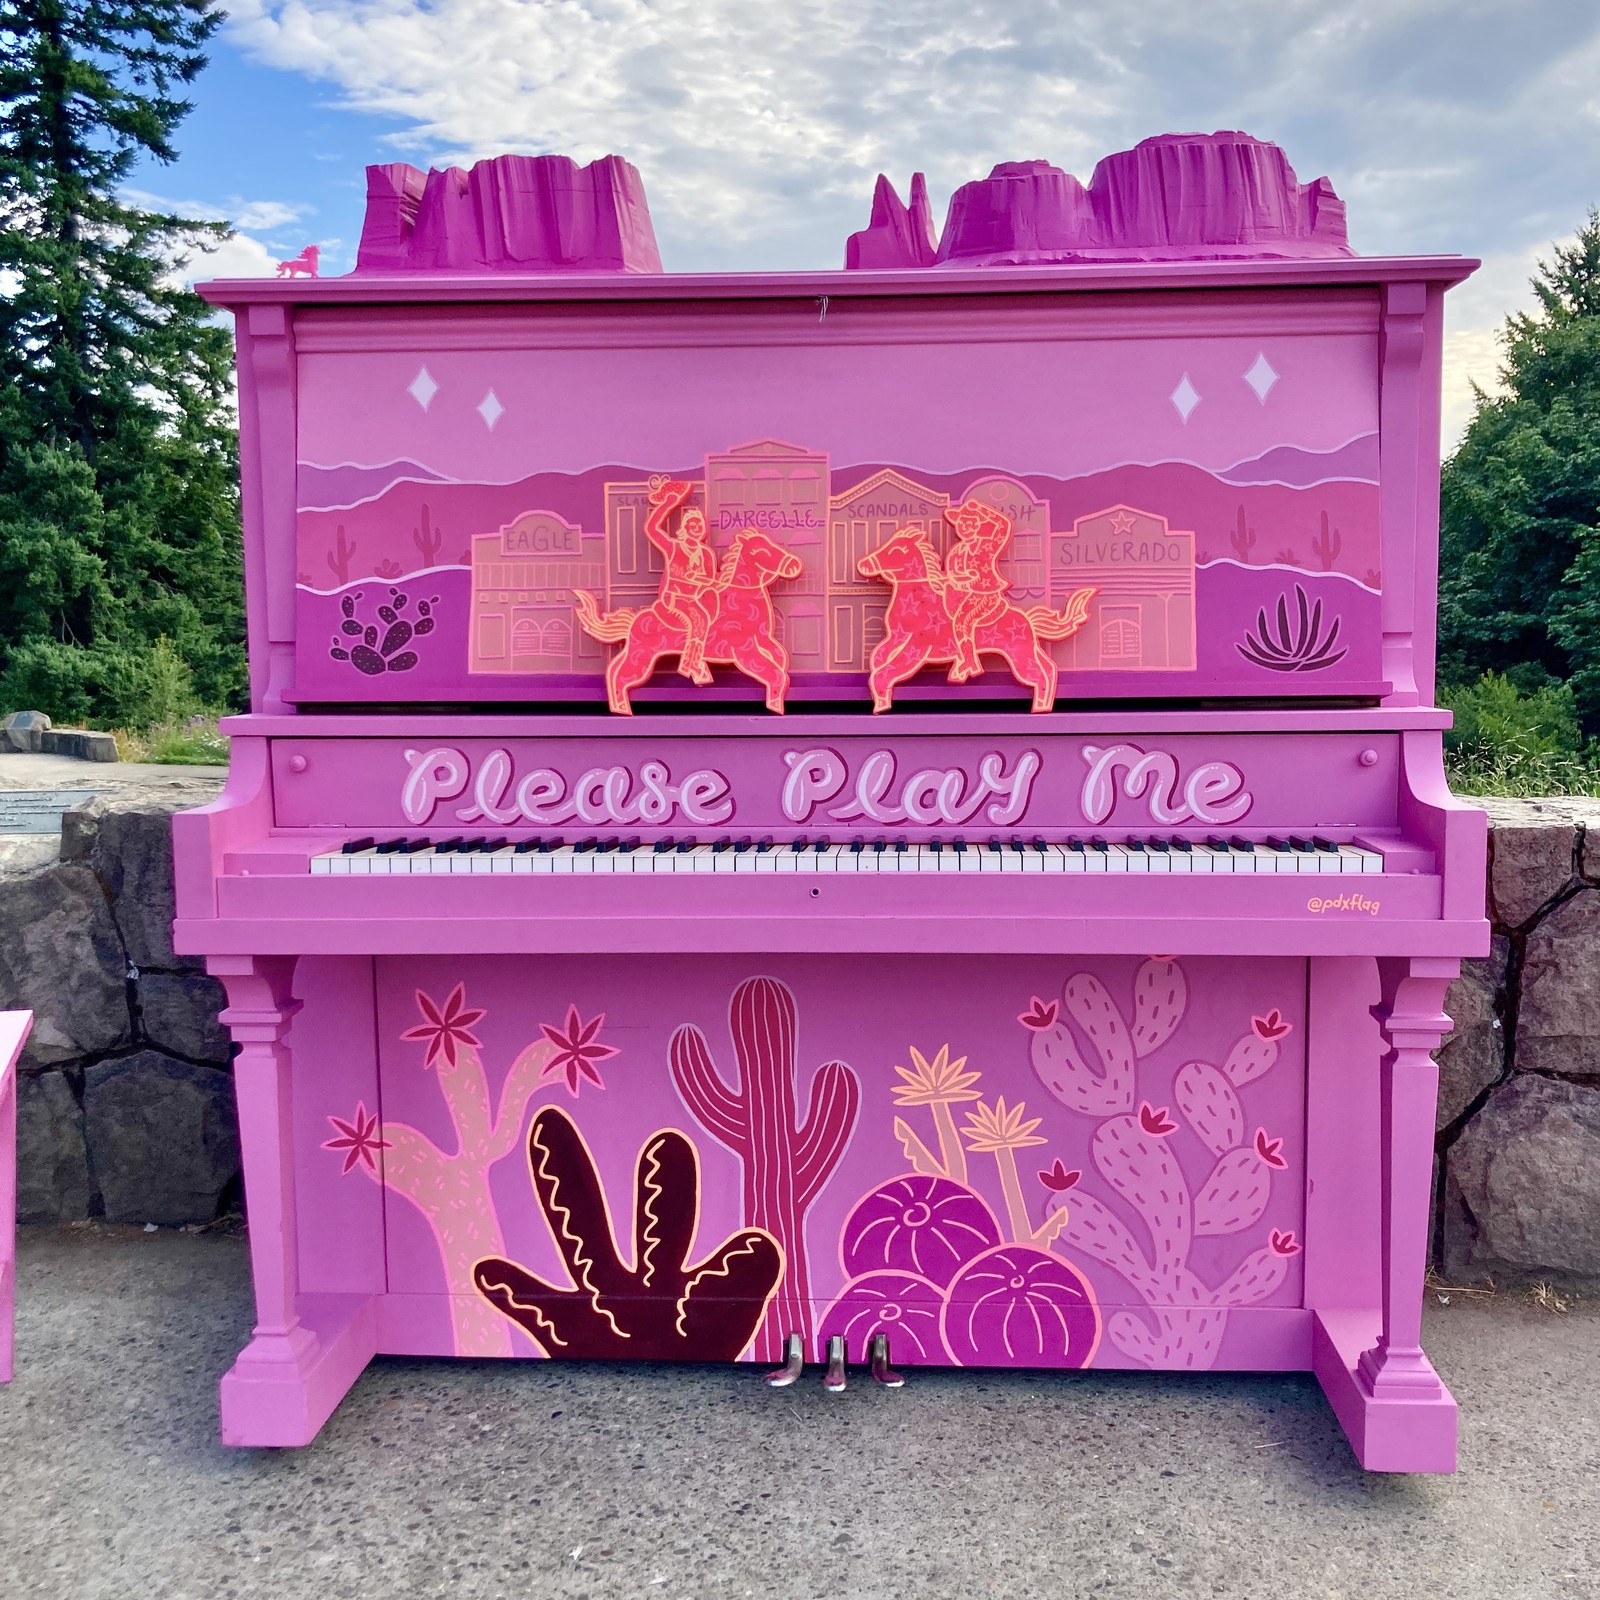 Upright piano outdoors at Council Crest Park, boldly painted with Old West motifs in pink and purple. Cacti, sagebrush, mountains, buttes etc. There are two cowboy cutouts in hot pink and yellow attached above the keyboard. Famous Portland gay bars & clubs are depicted as Old West Saloons: The Eagle, Slaughters, Darcelle, Scandals, Silverado. Attached to the top of the piano is a carved relief of buttes resembling Monument Valley. “Please Play Me” is written in large letters above the keyboard. It is tagged with @pdxflag. (Not in the picture is the artist credit, attached to the side: “This piano was created by Grant Brady”